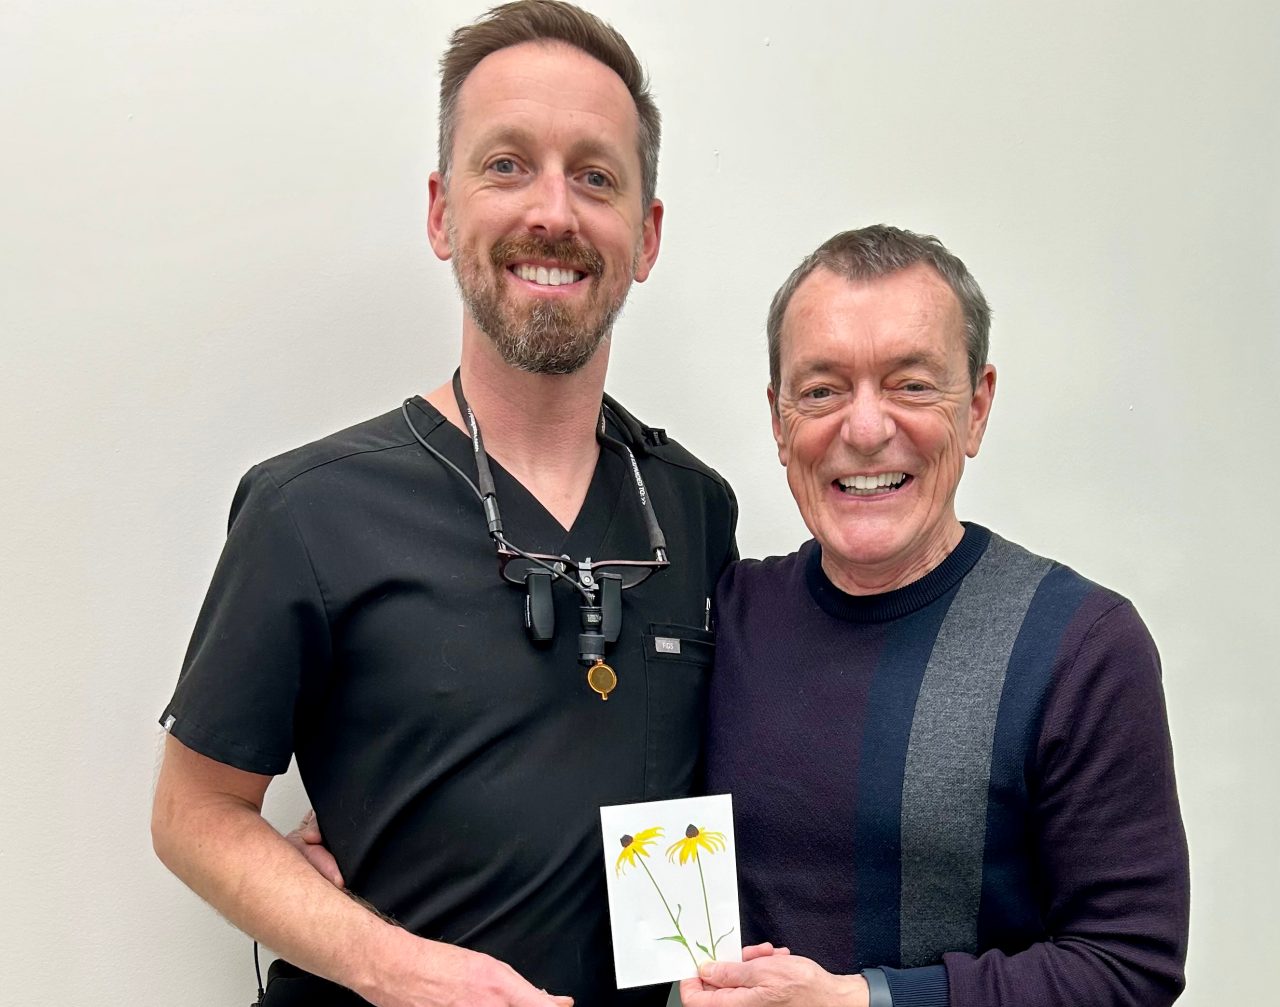 A man wearing black scrubs stands alongside a man in a purple sweater who is holding a card with two yellow yellow flowers.